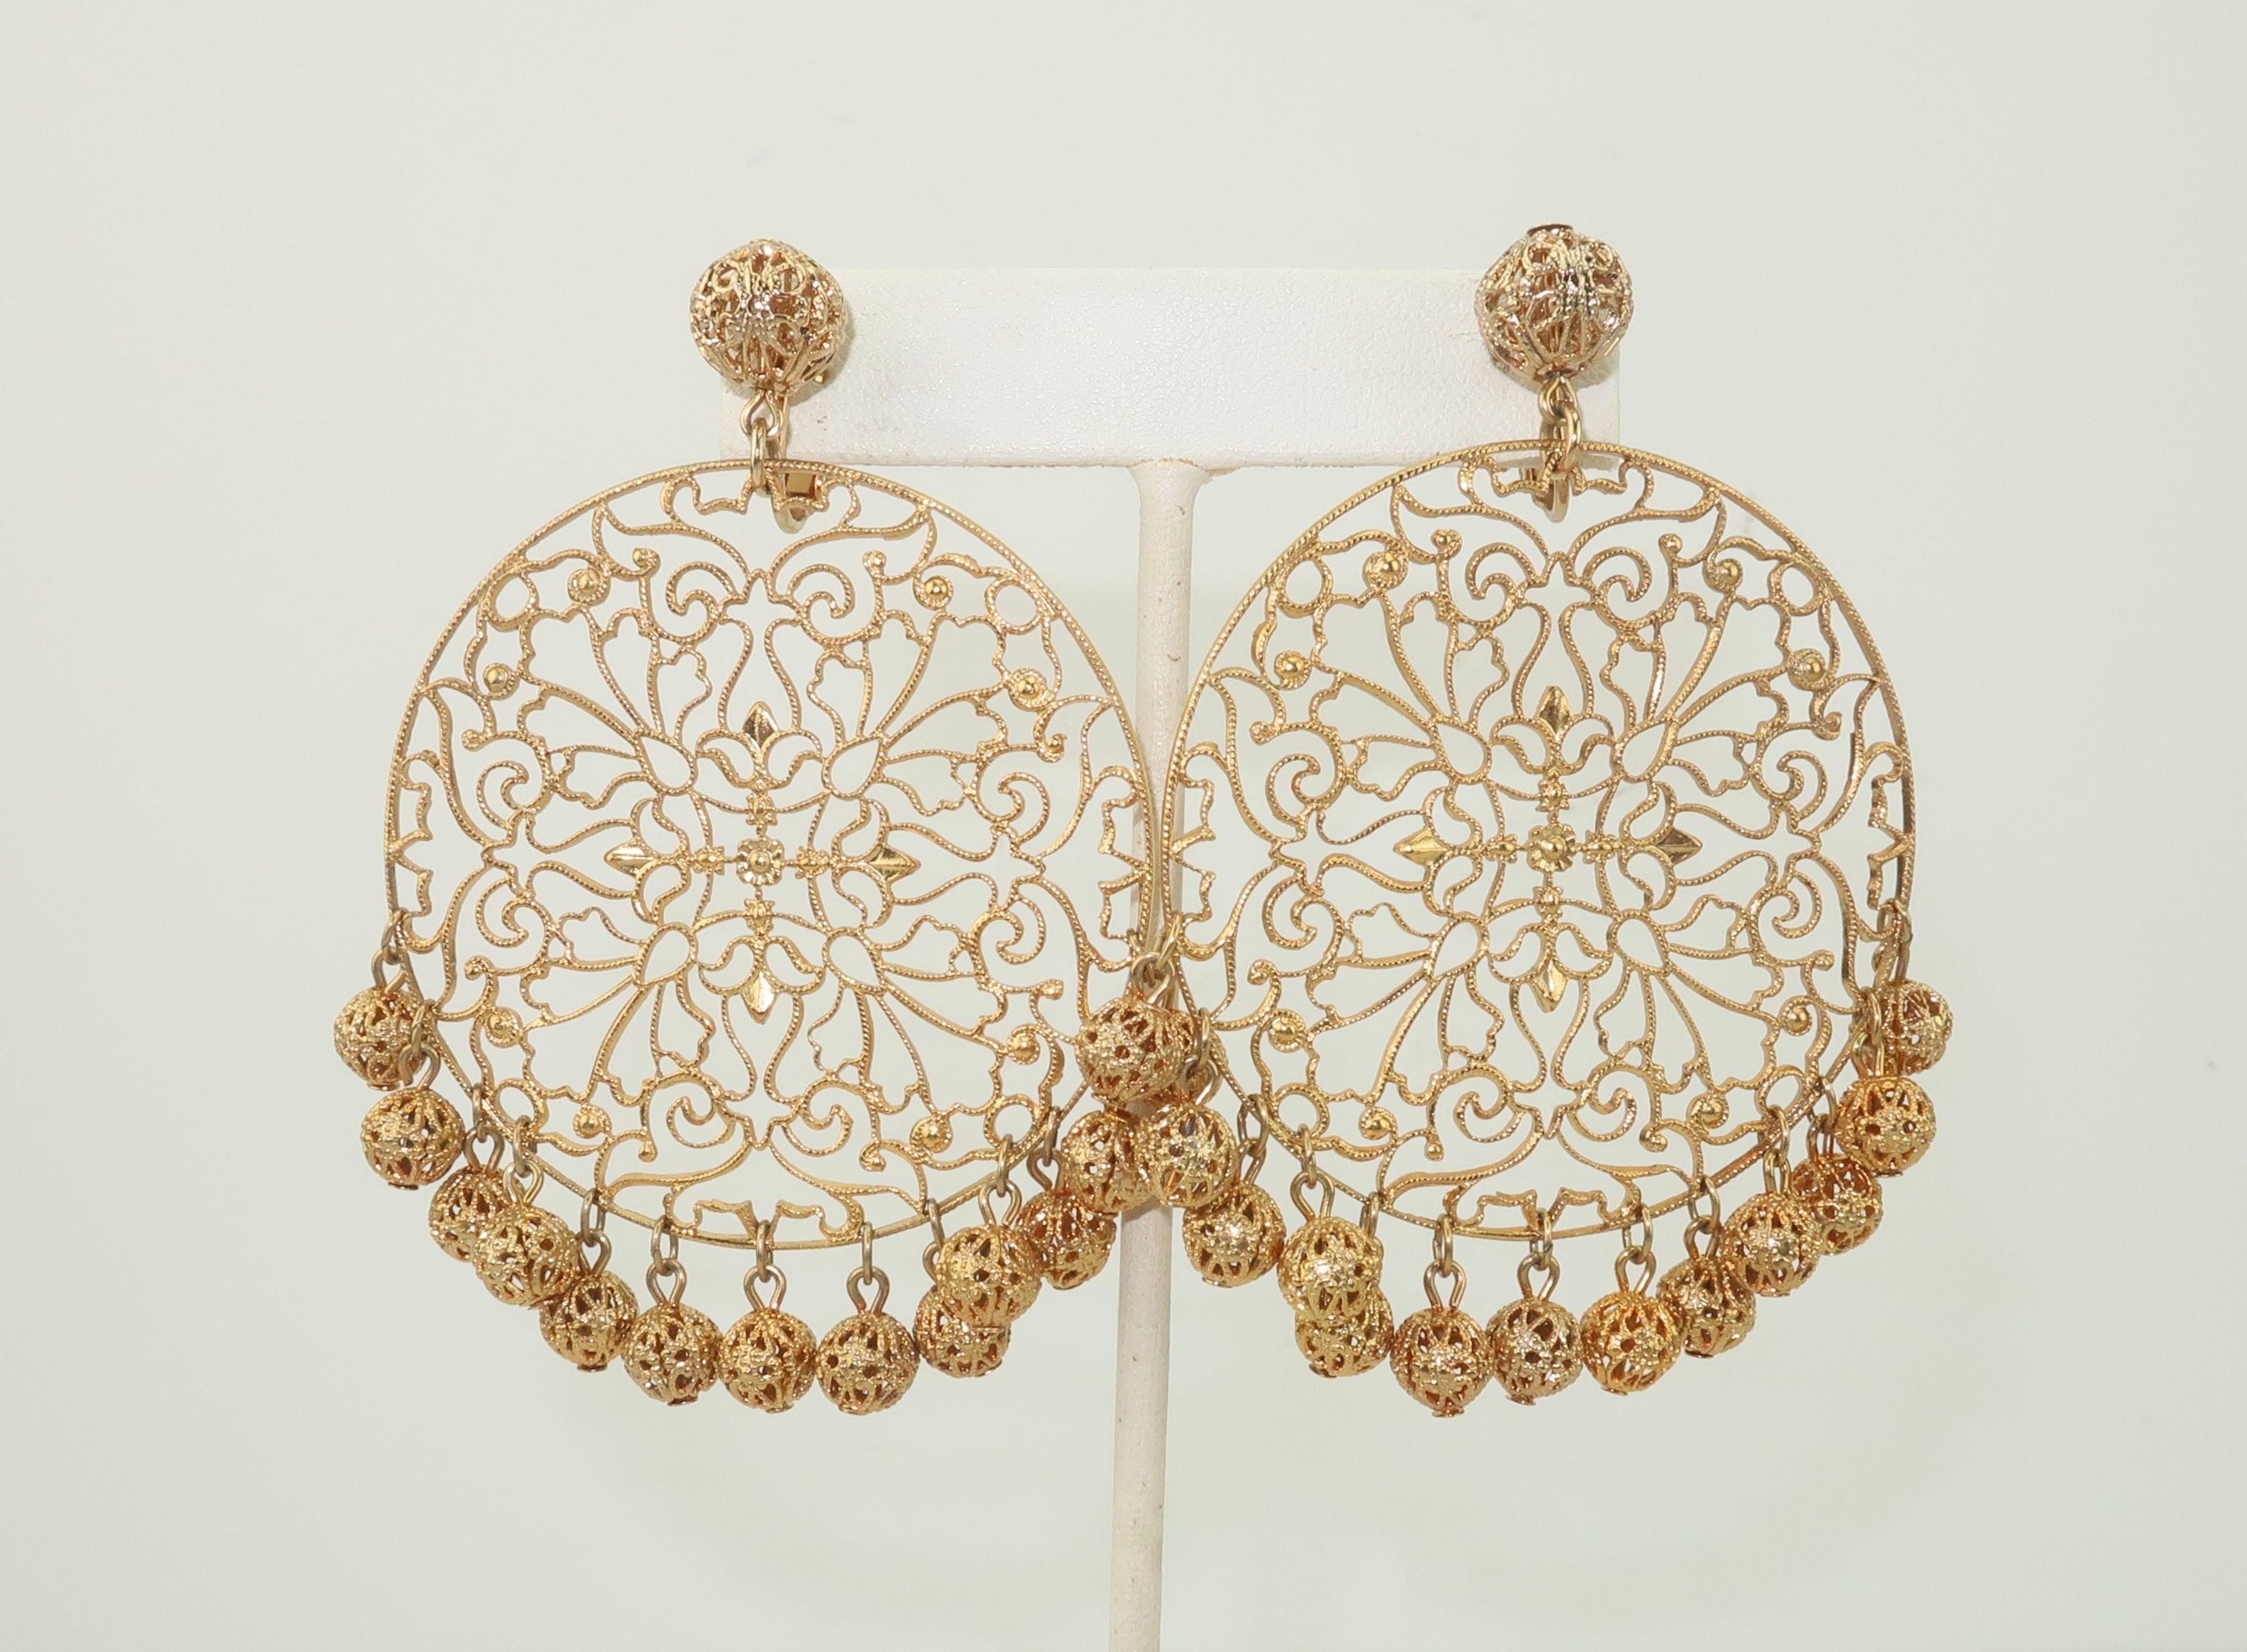 Get a little bohemian style with these gold tone filigree dangle earrings by the venerable American costume jewelry company, Napier.  An extra large filigree disk dangles from a ball base and is embellished with ball 'fringe' at the bottom.  They